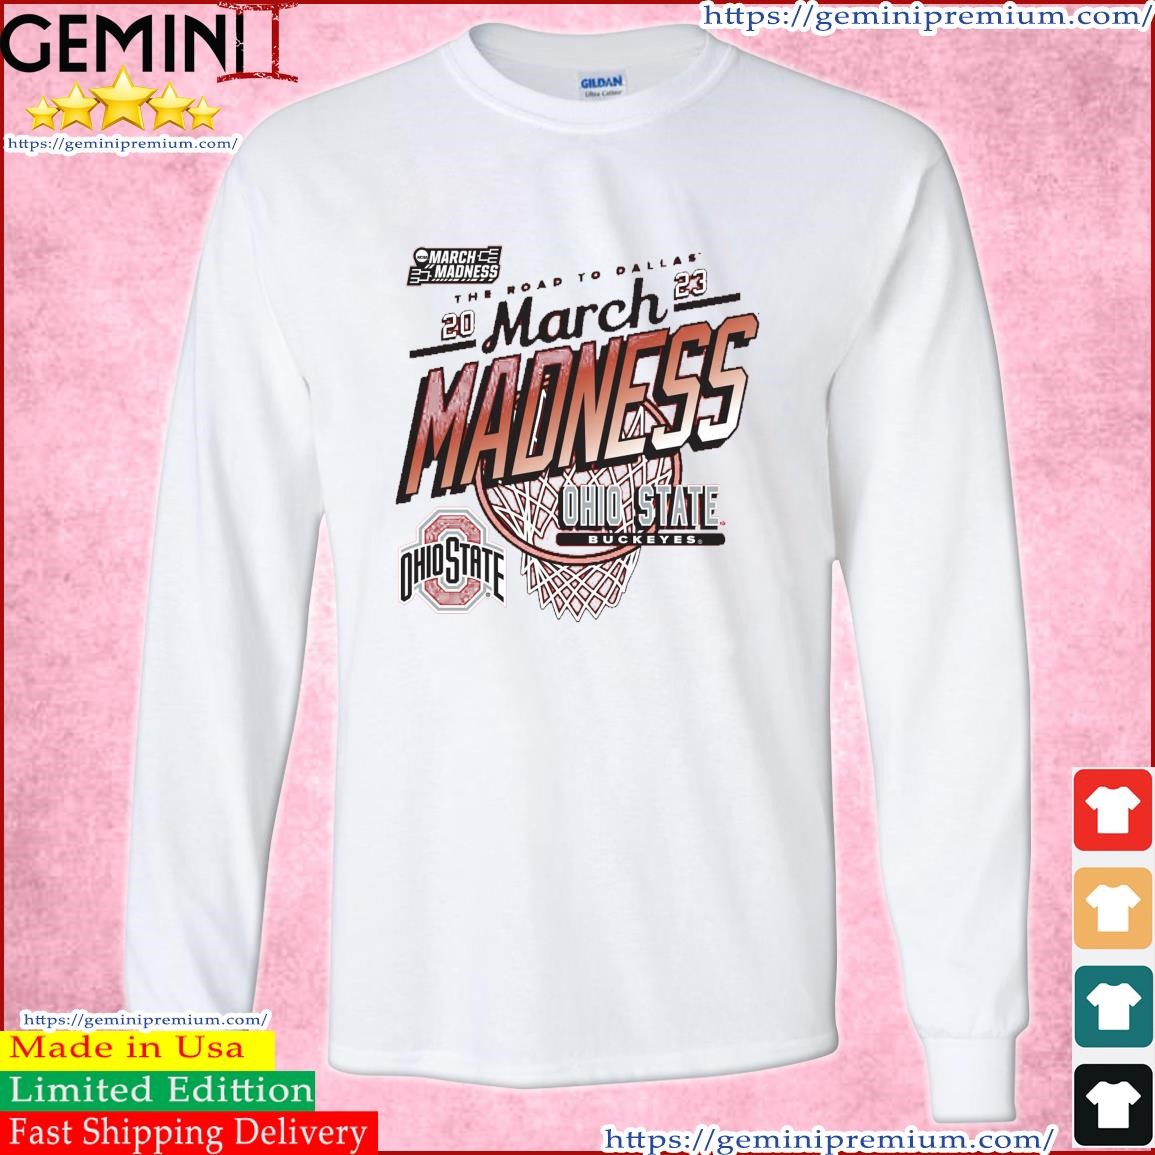 Ohio State Buckeyes Women's Basketball 2023 NCAA March Madness The Road To Dallas Shirt Long Sleeve Tee.jpg